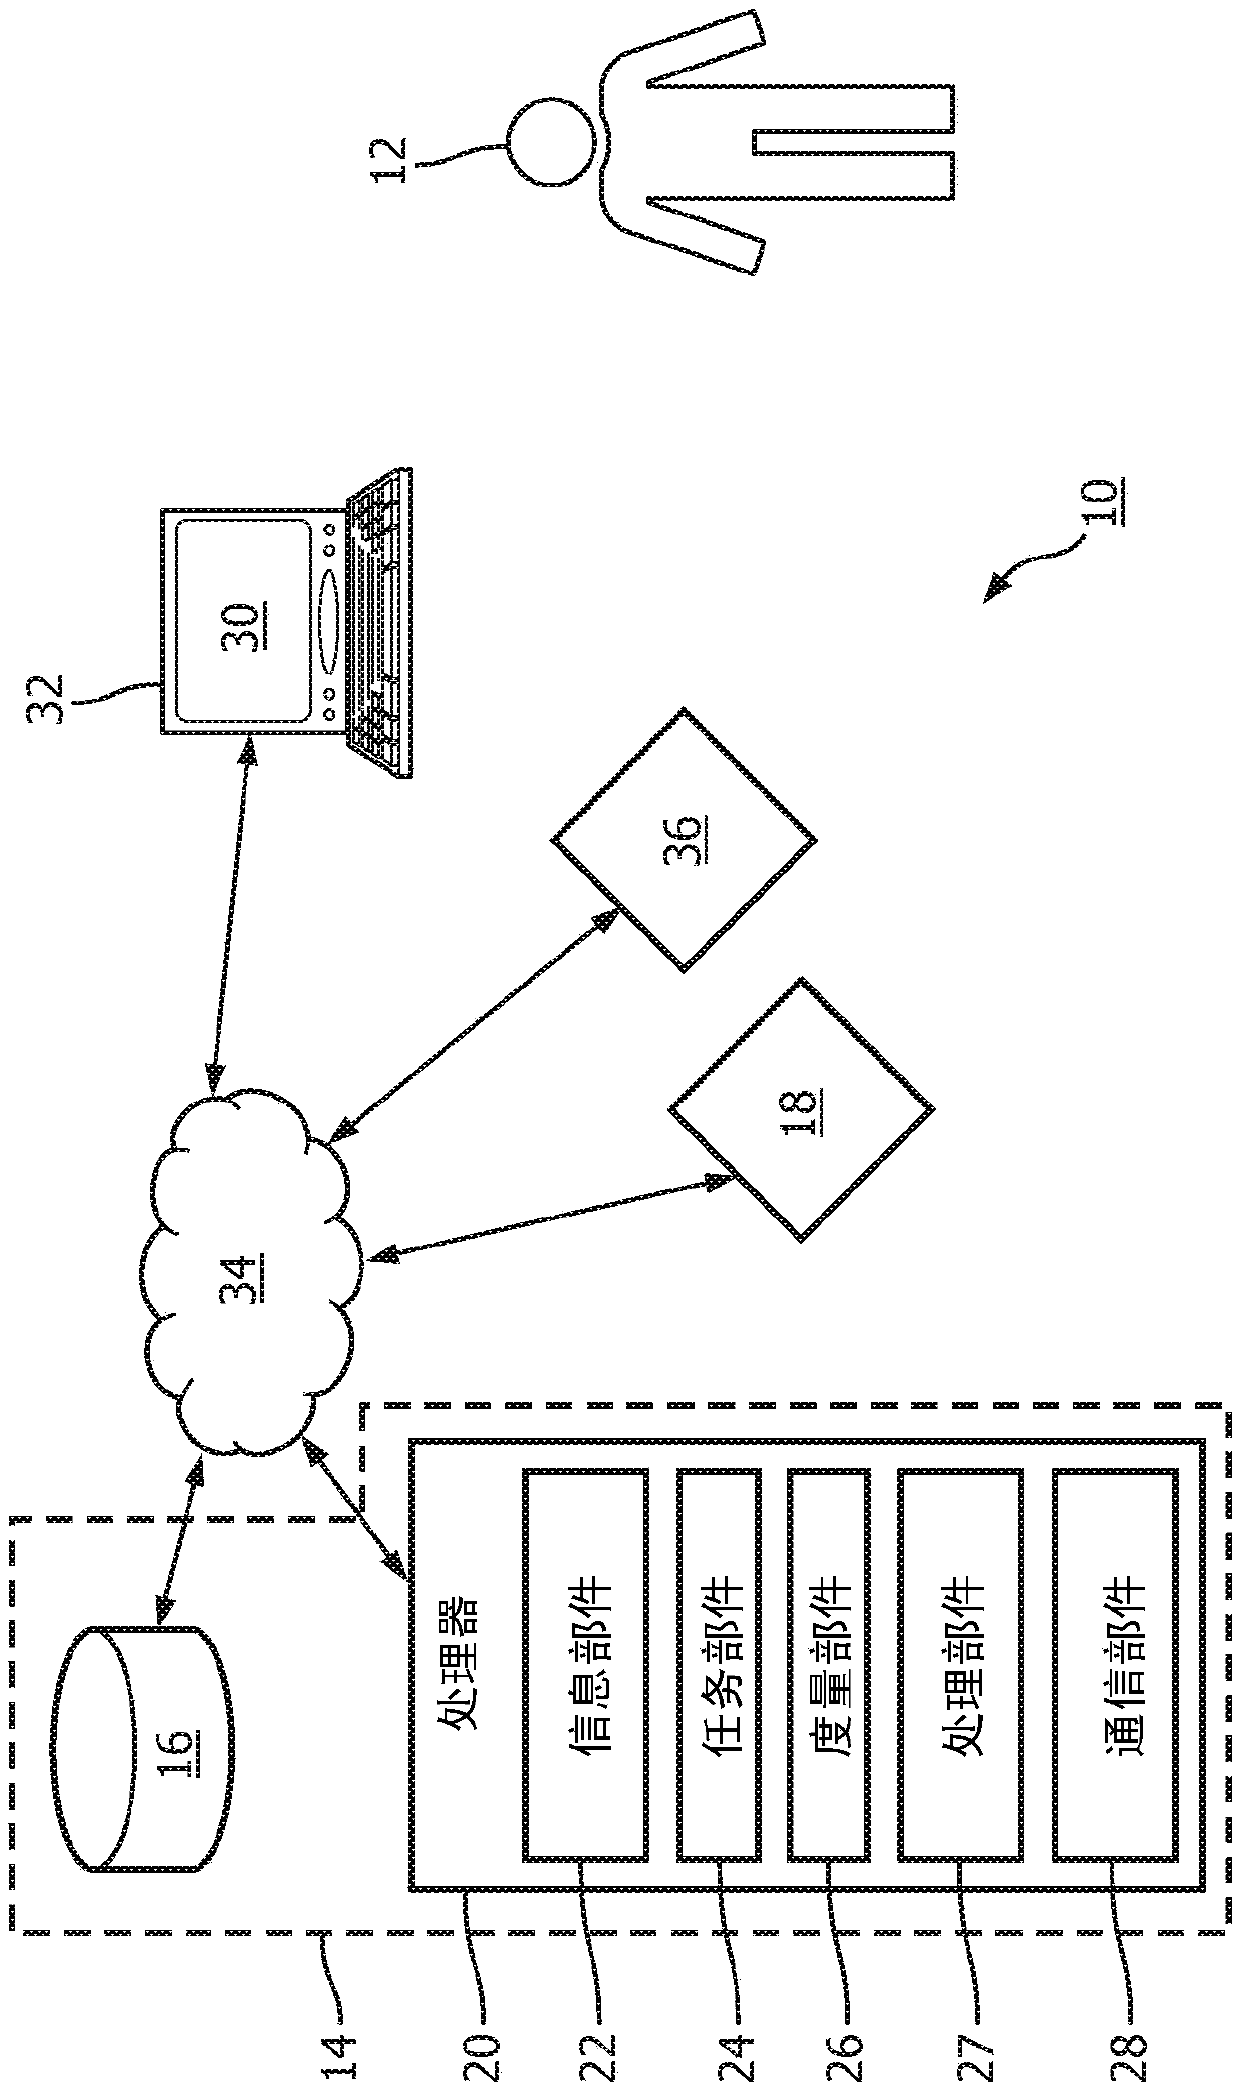 Method And System For Load Balancing Of Care Requests For Workload Management